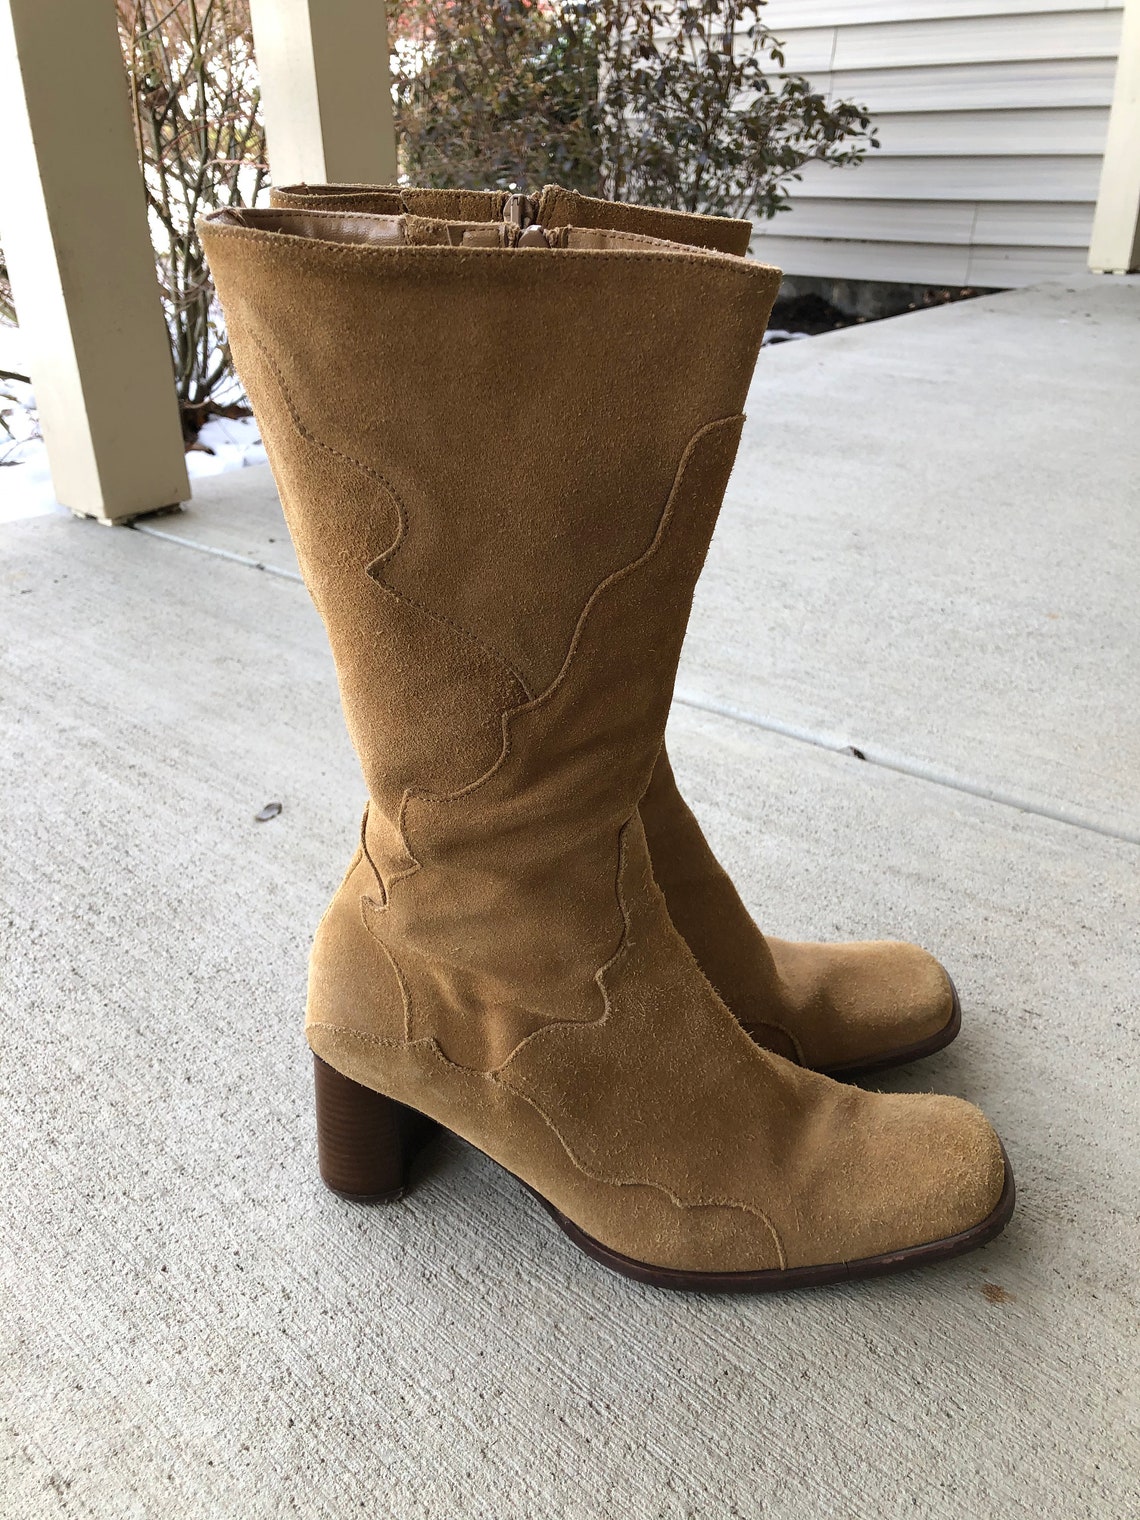 Vintage Camel Brown SUEDE boots mid calf MOD go-go BOOTS | Etsy